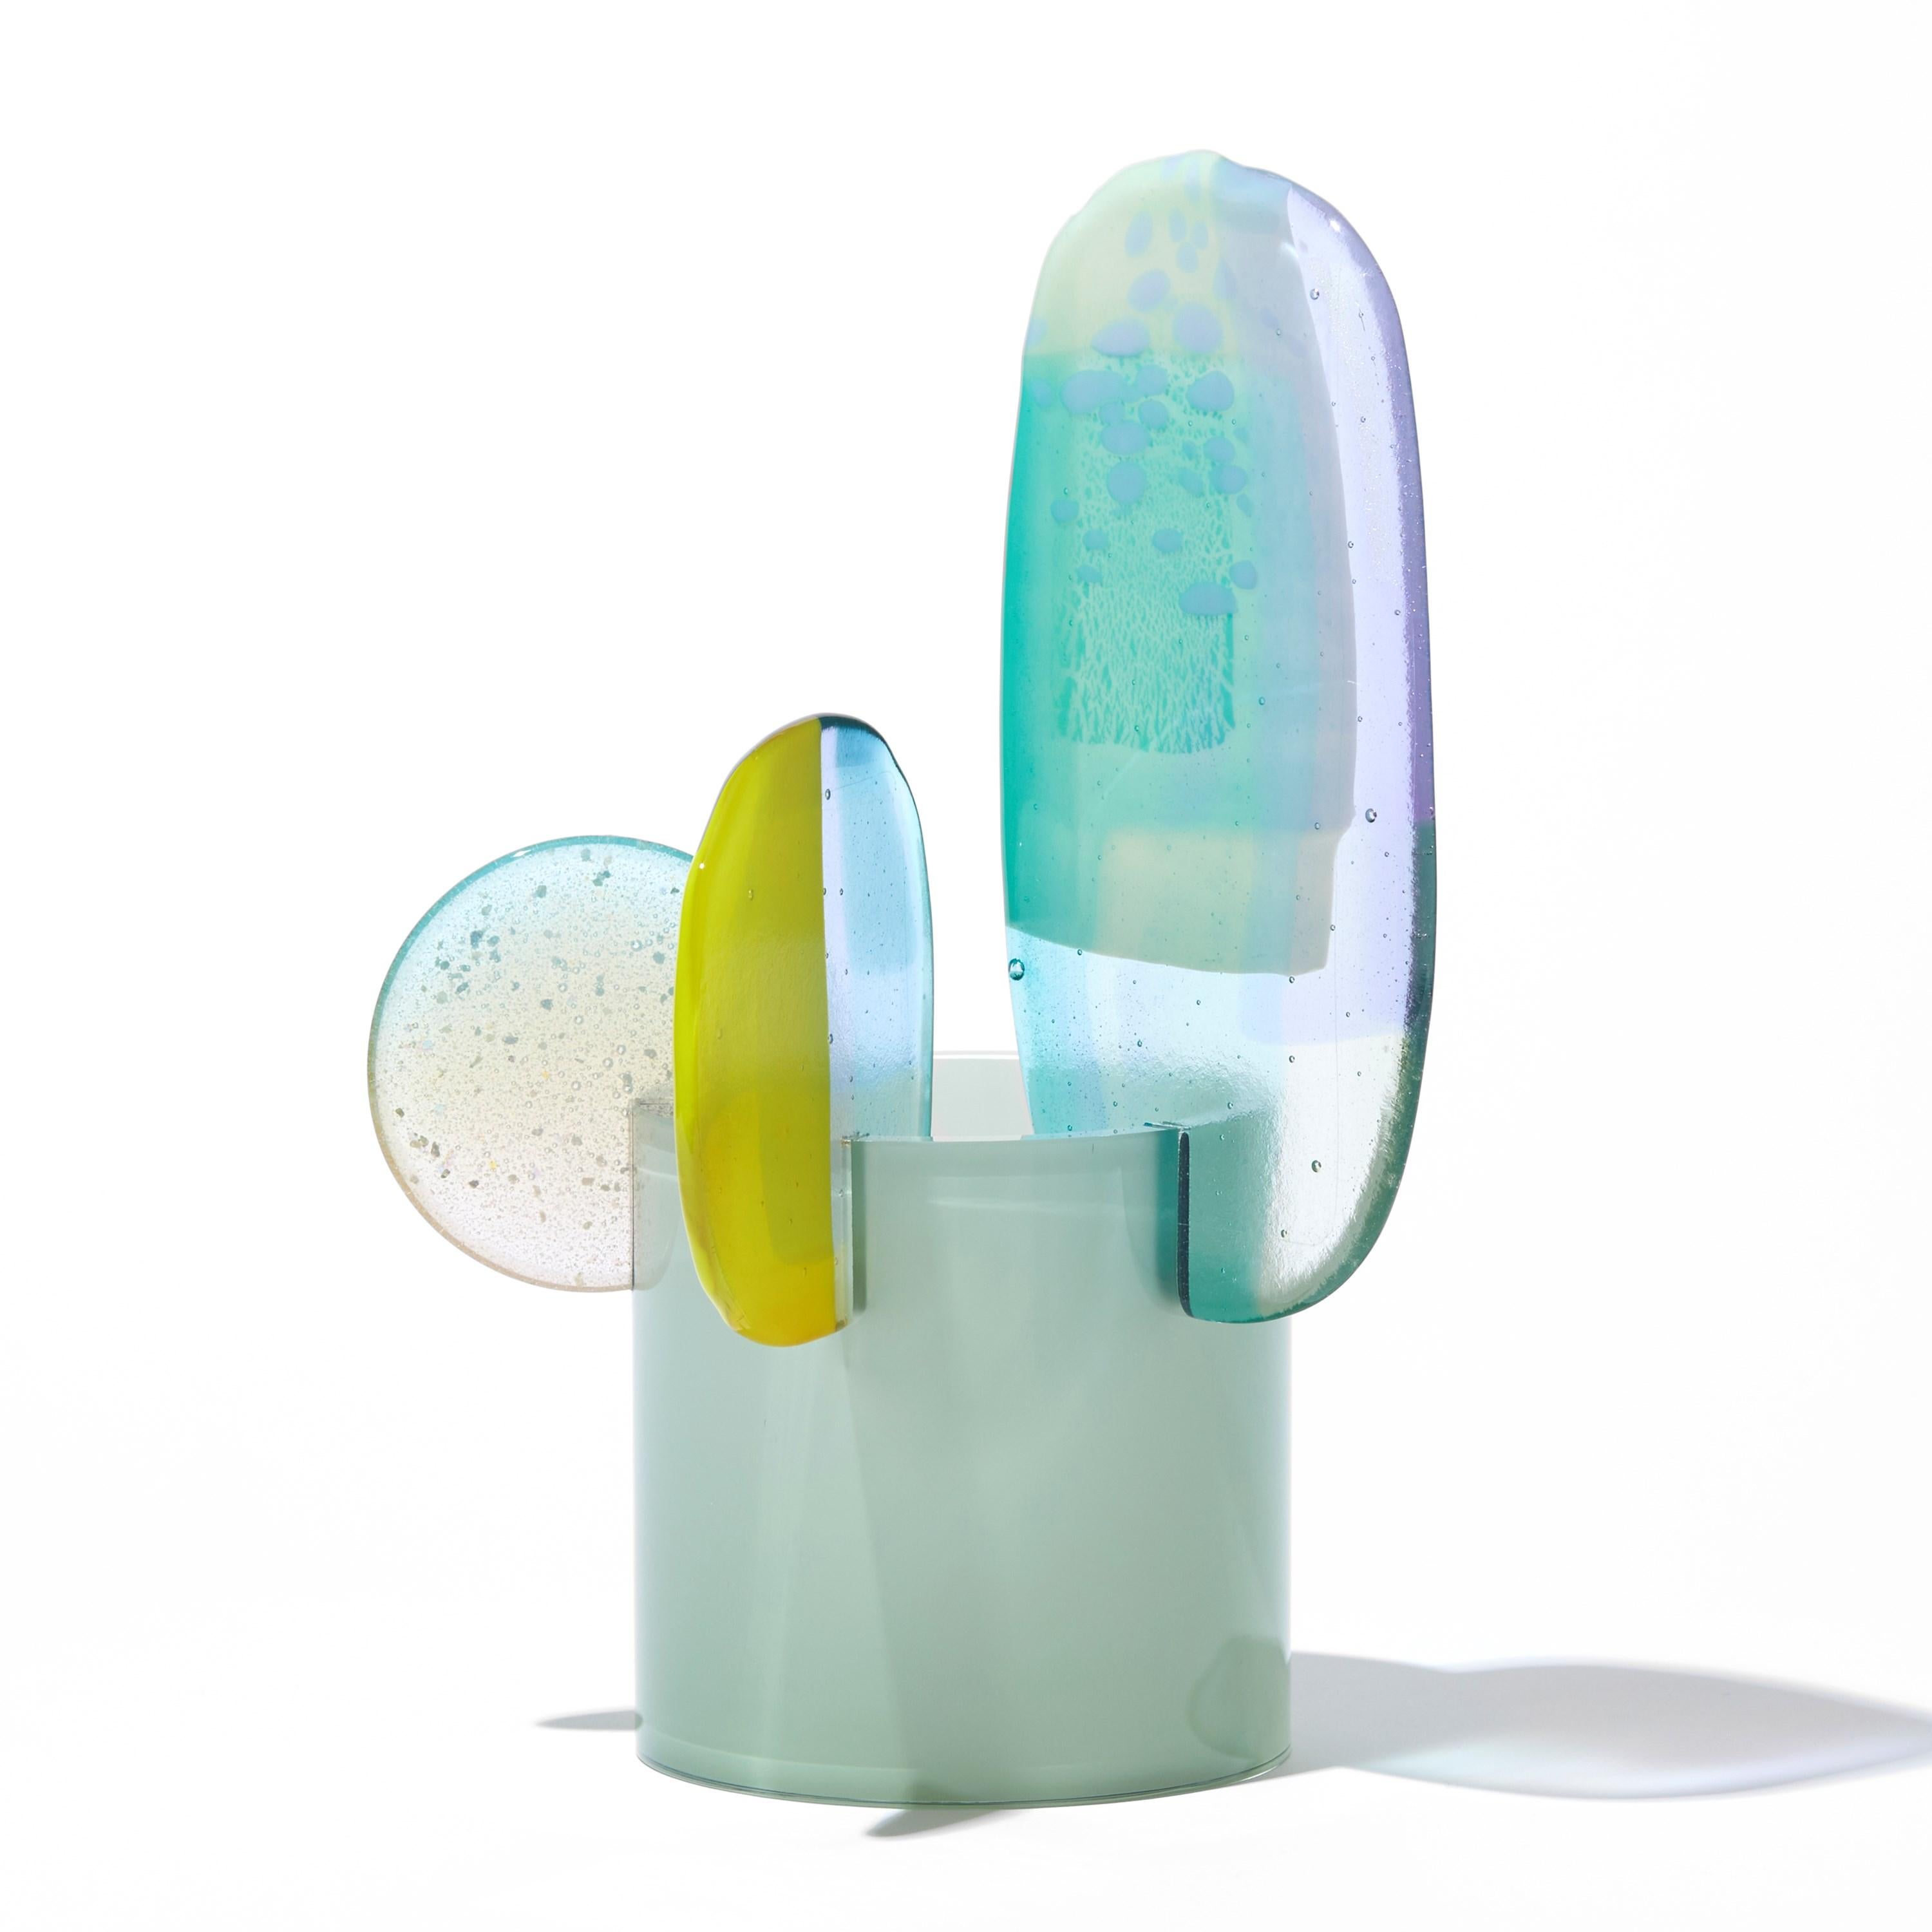 'Paradise 08 in Celadon' is a unique glass sculpture created using hybrid hand-made glass techniques by the British artist Amy Cushing. Combining mouth blown glass with kiln formed glass, each piece within the collection displays a multiple of